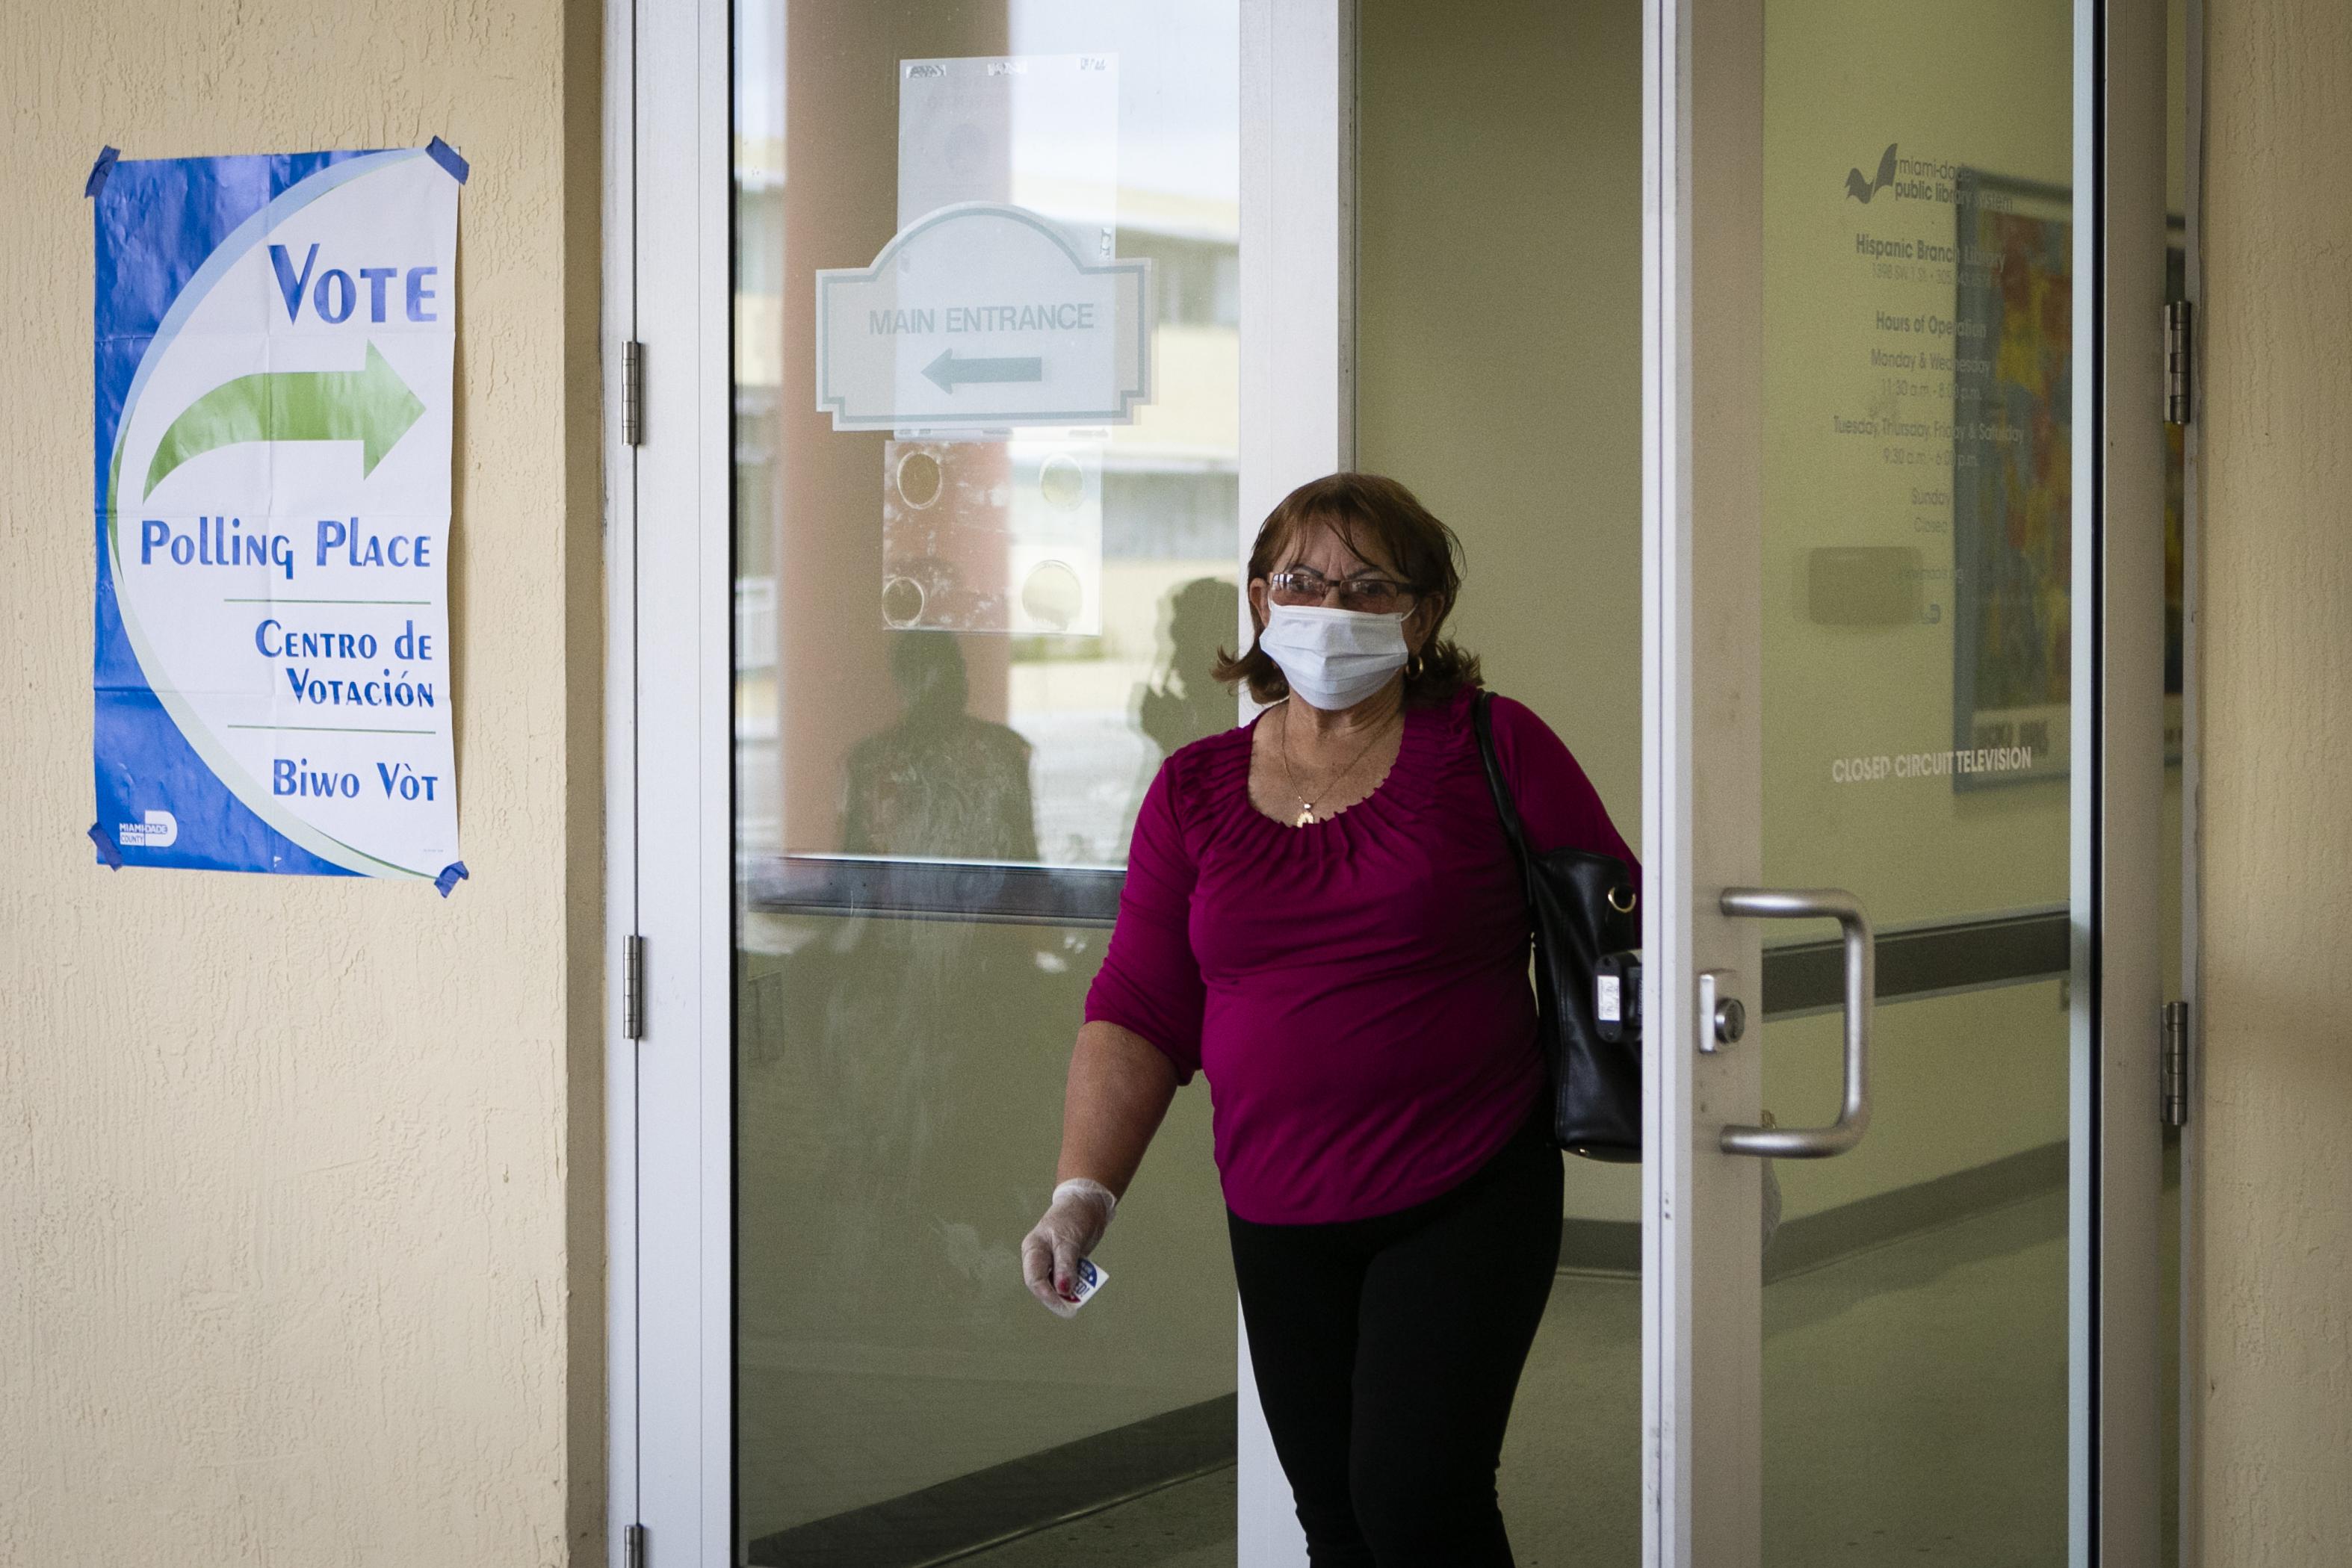 A woman wearing a surgical mask and gloves exits the polling place. A "VOTE" sign hangs on the wall next to the doors.